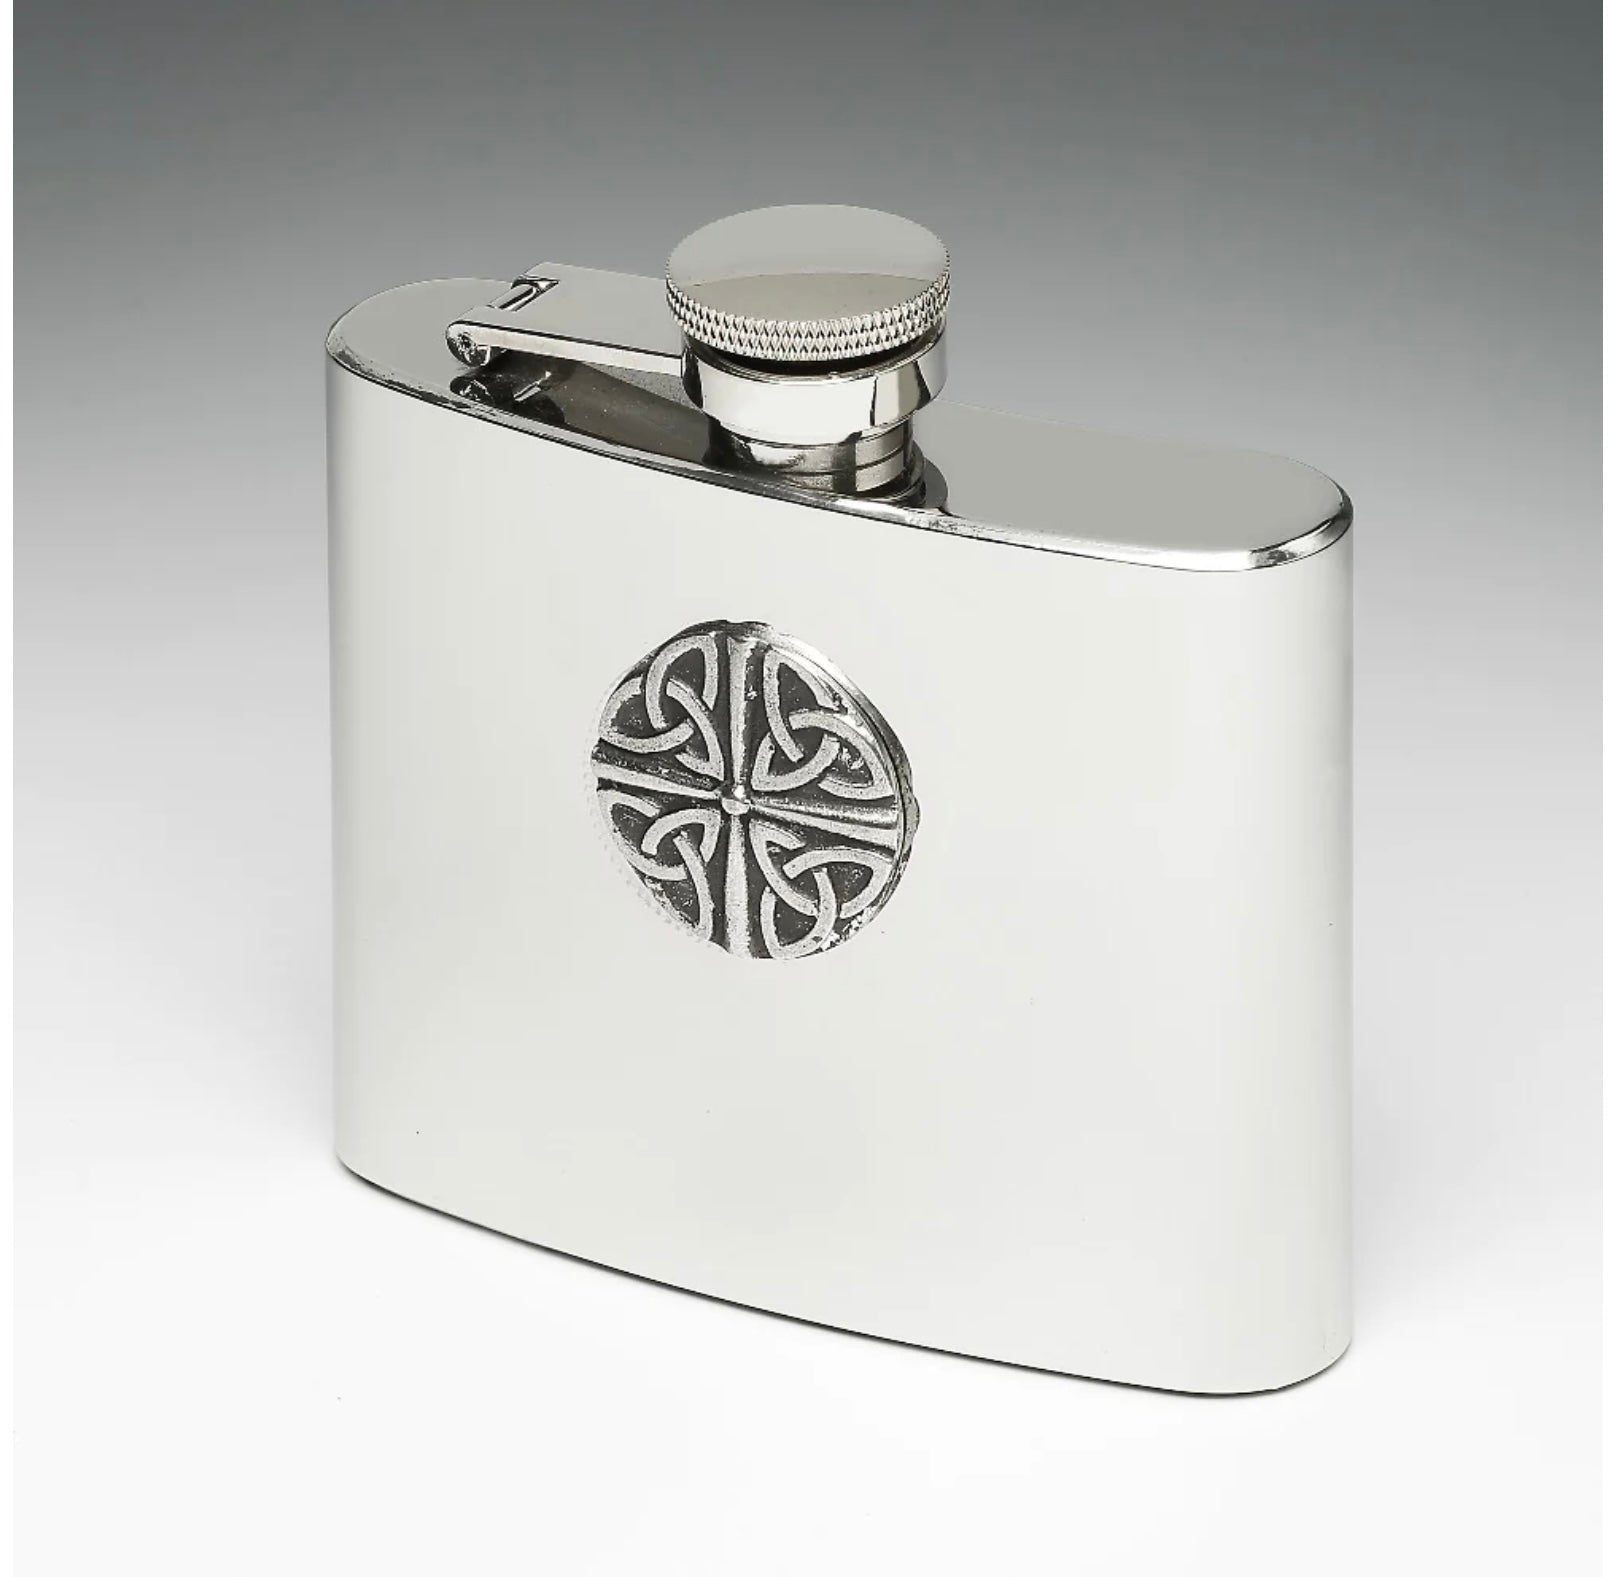 Stainless Steel Hip Flask with Pewter Emblem 5oz 5724B